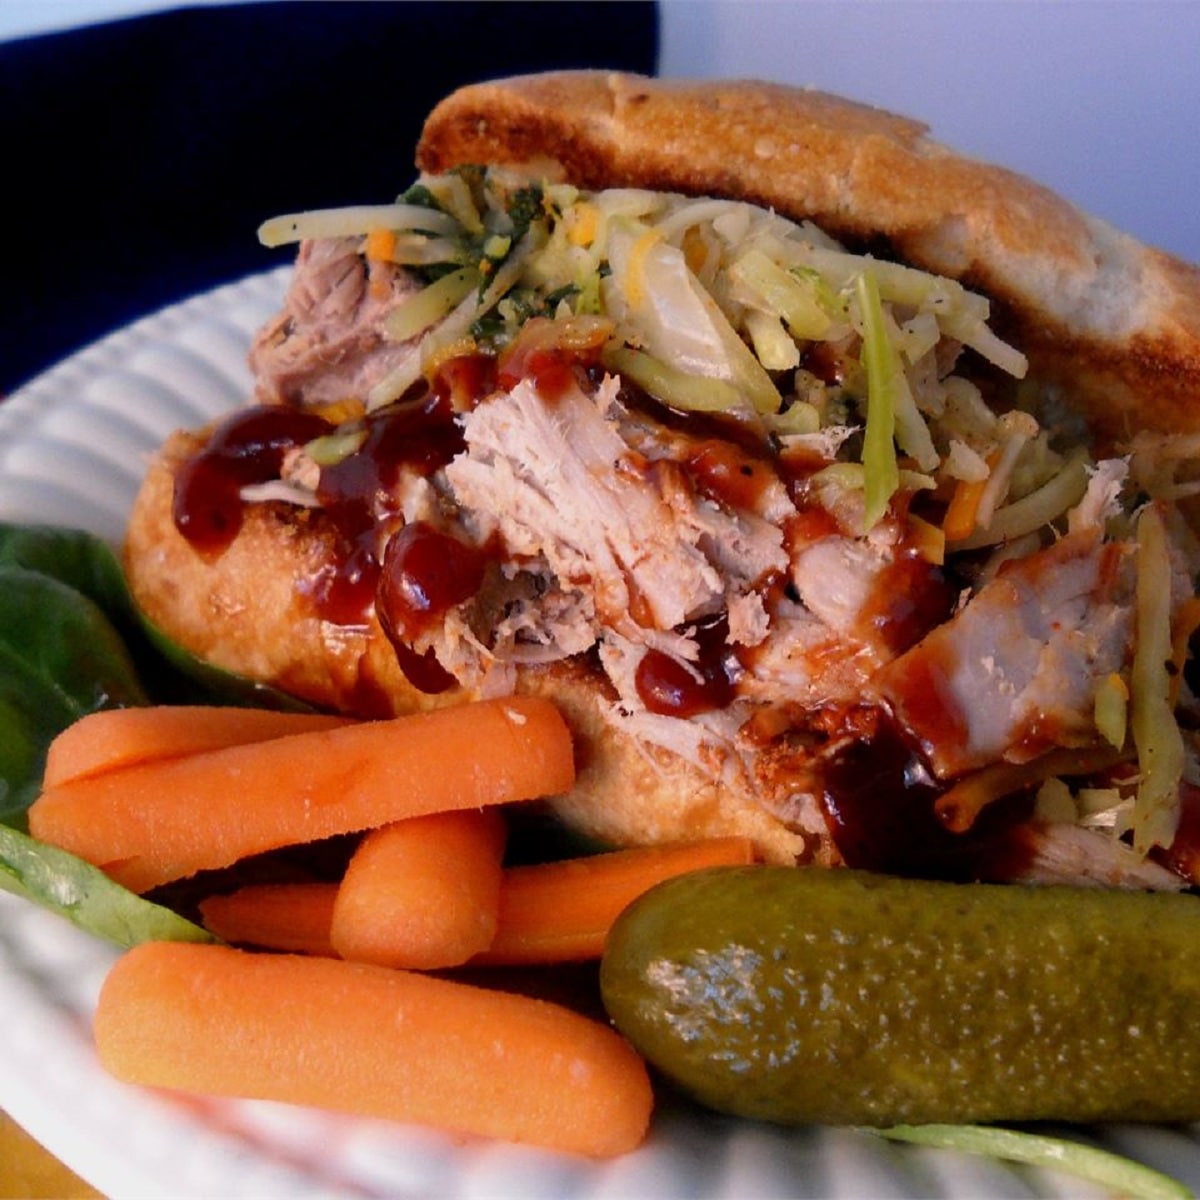 Big sandwich with shredded meat and sauce on white plate next to carrots and pickles